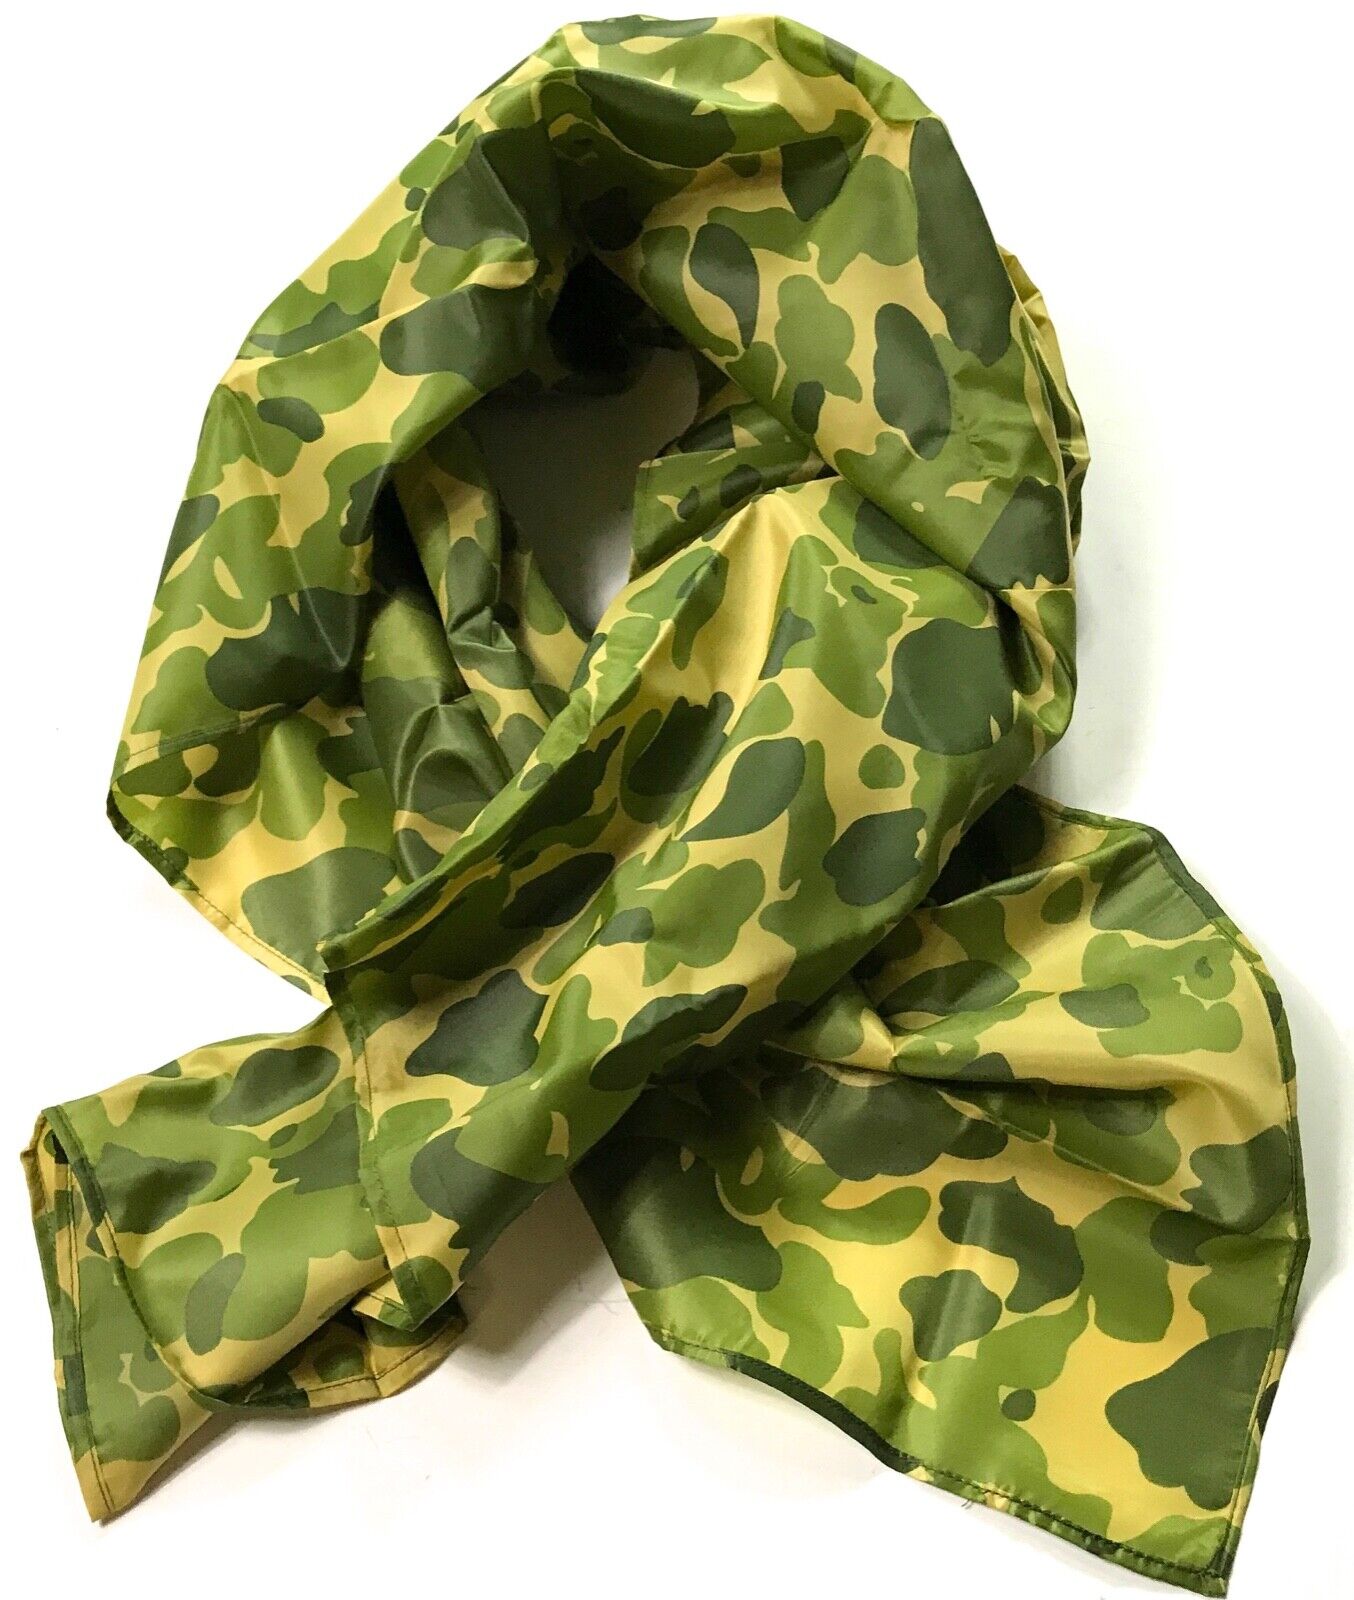  WWII US ARMY AIRBORNE PARATROOPER CAMO JUMP SCARF-LARGE